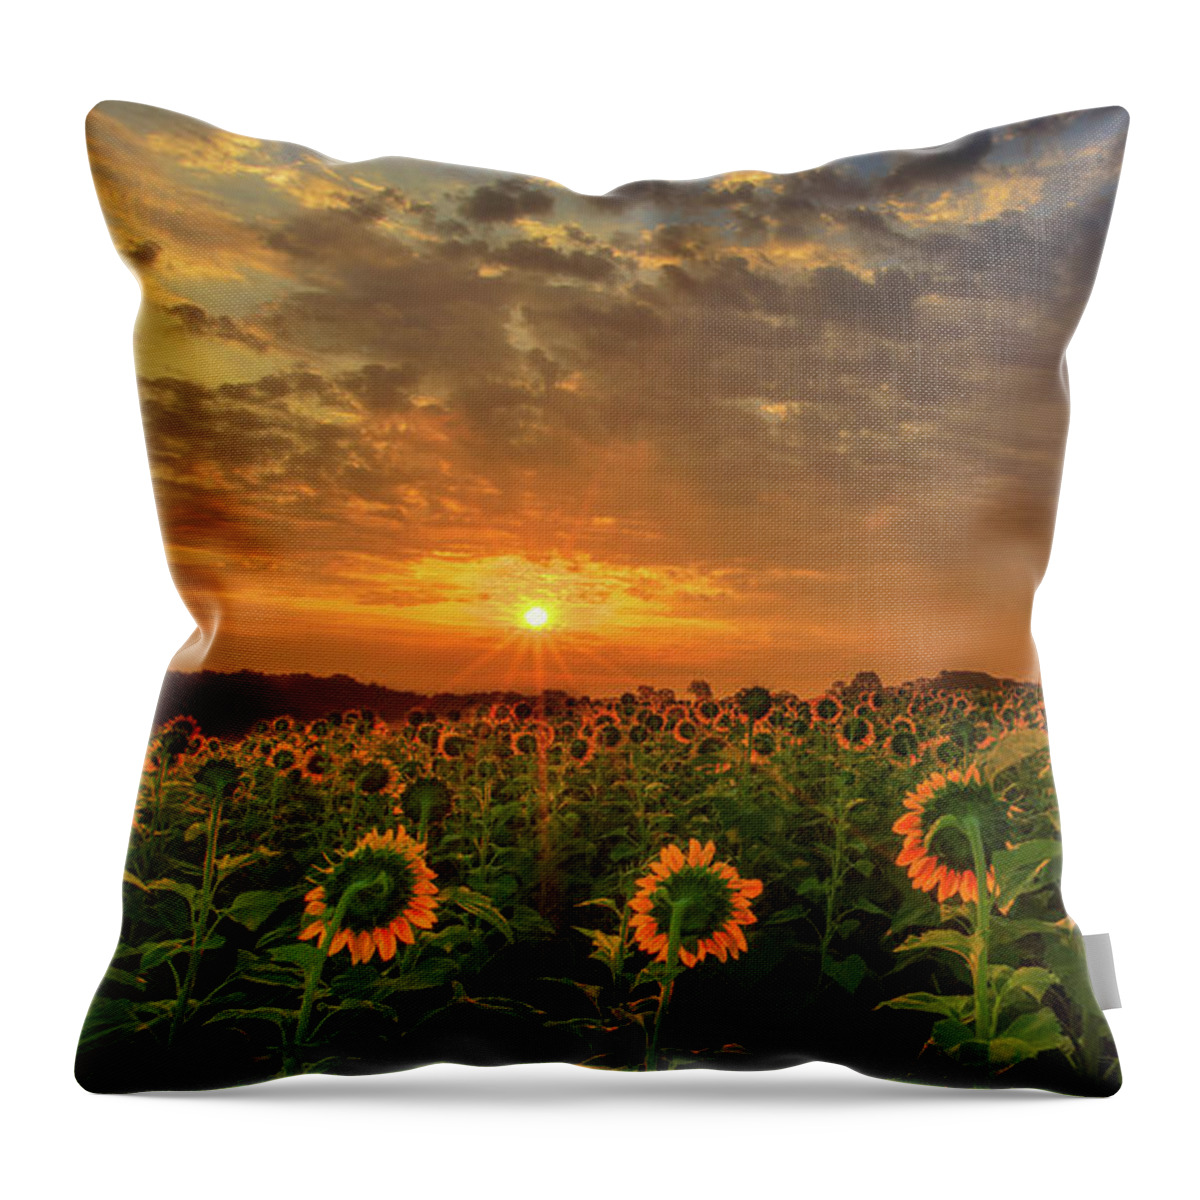 Clouds Throw Pillow featuring the photograph Sunflower Peak by Andrew Slater